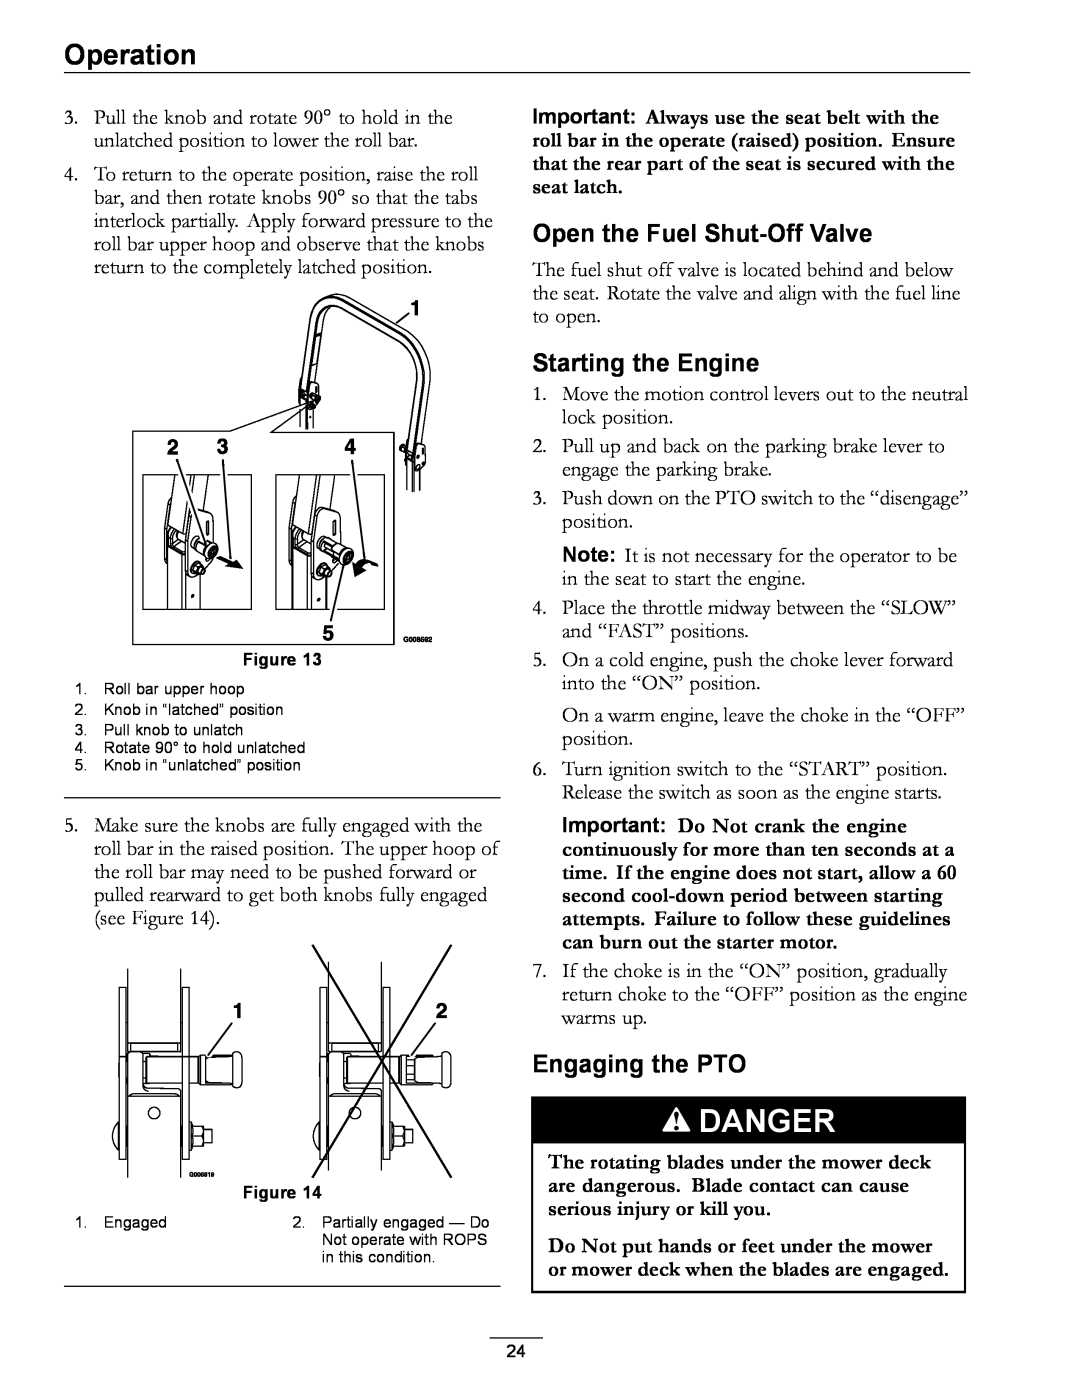 Exmark 000 & higher manual Open the Fuel Shut-OffValve, Starting the Engine, Engaging the PTO, Danger, Operation 